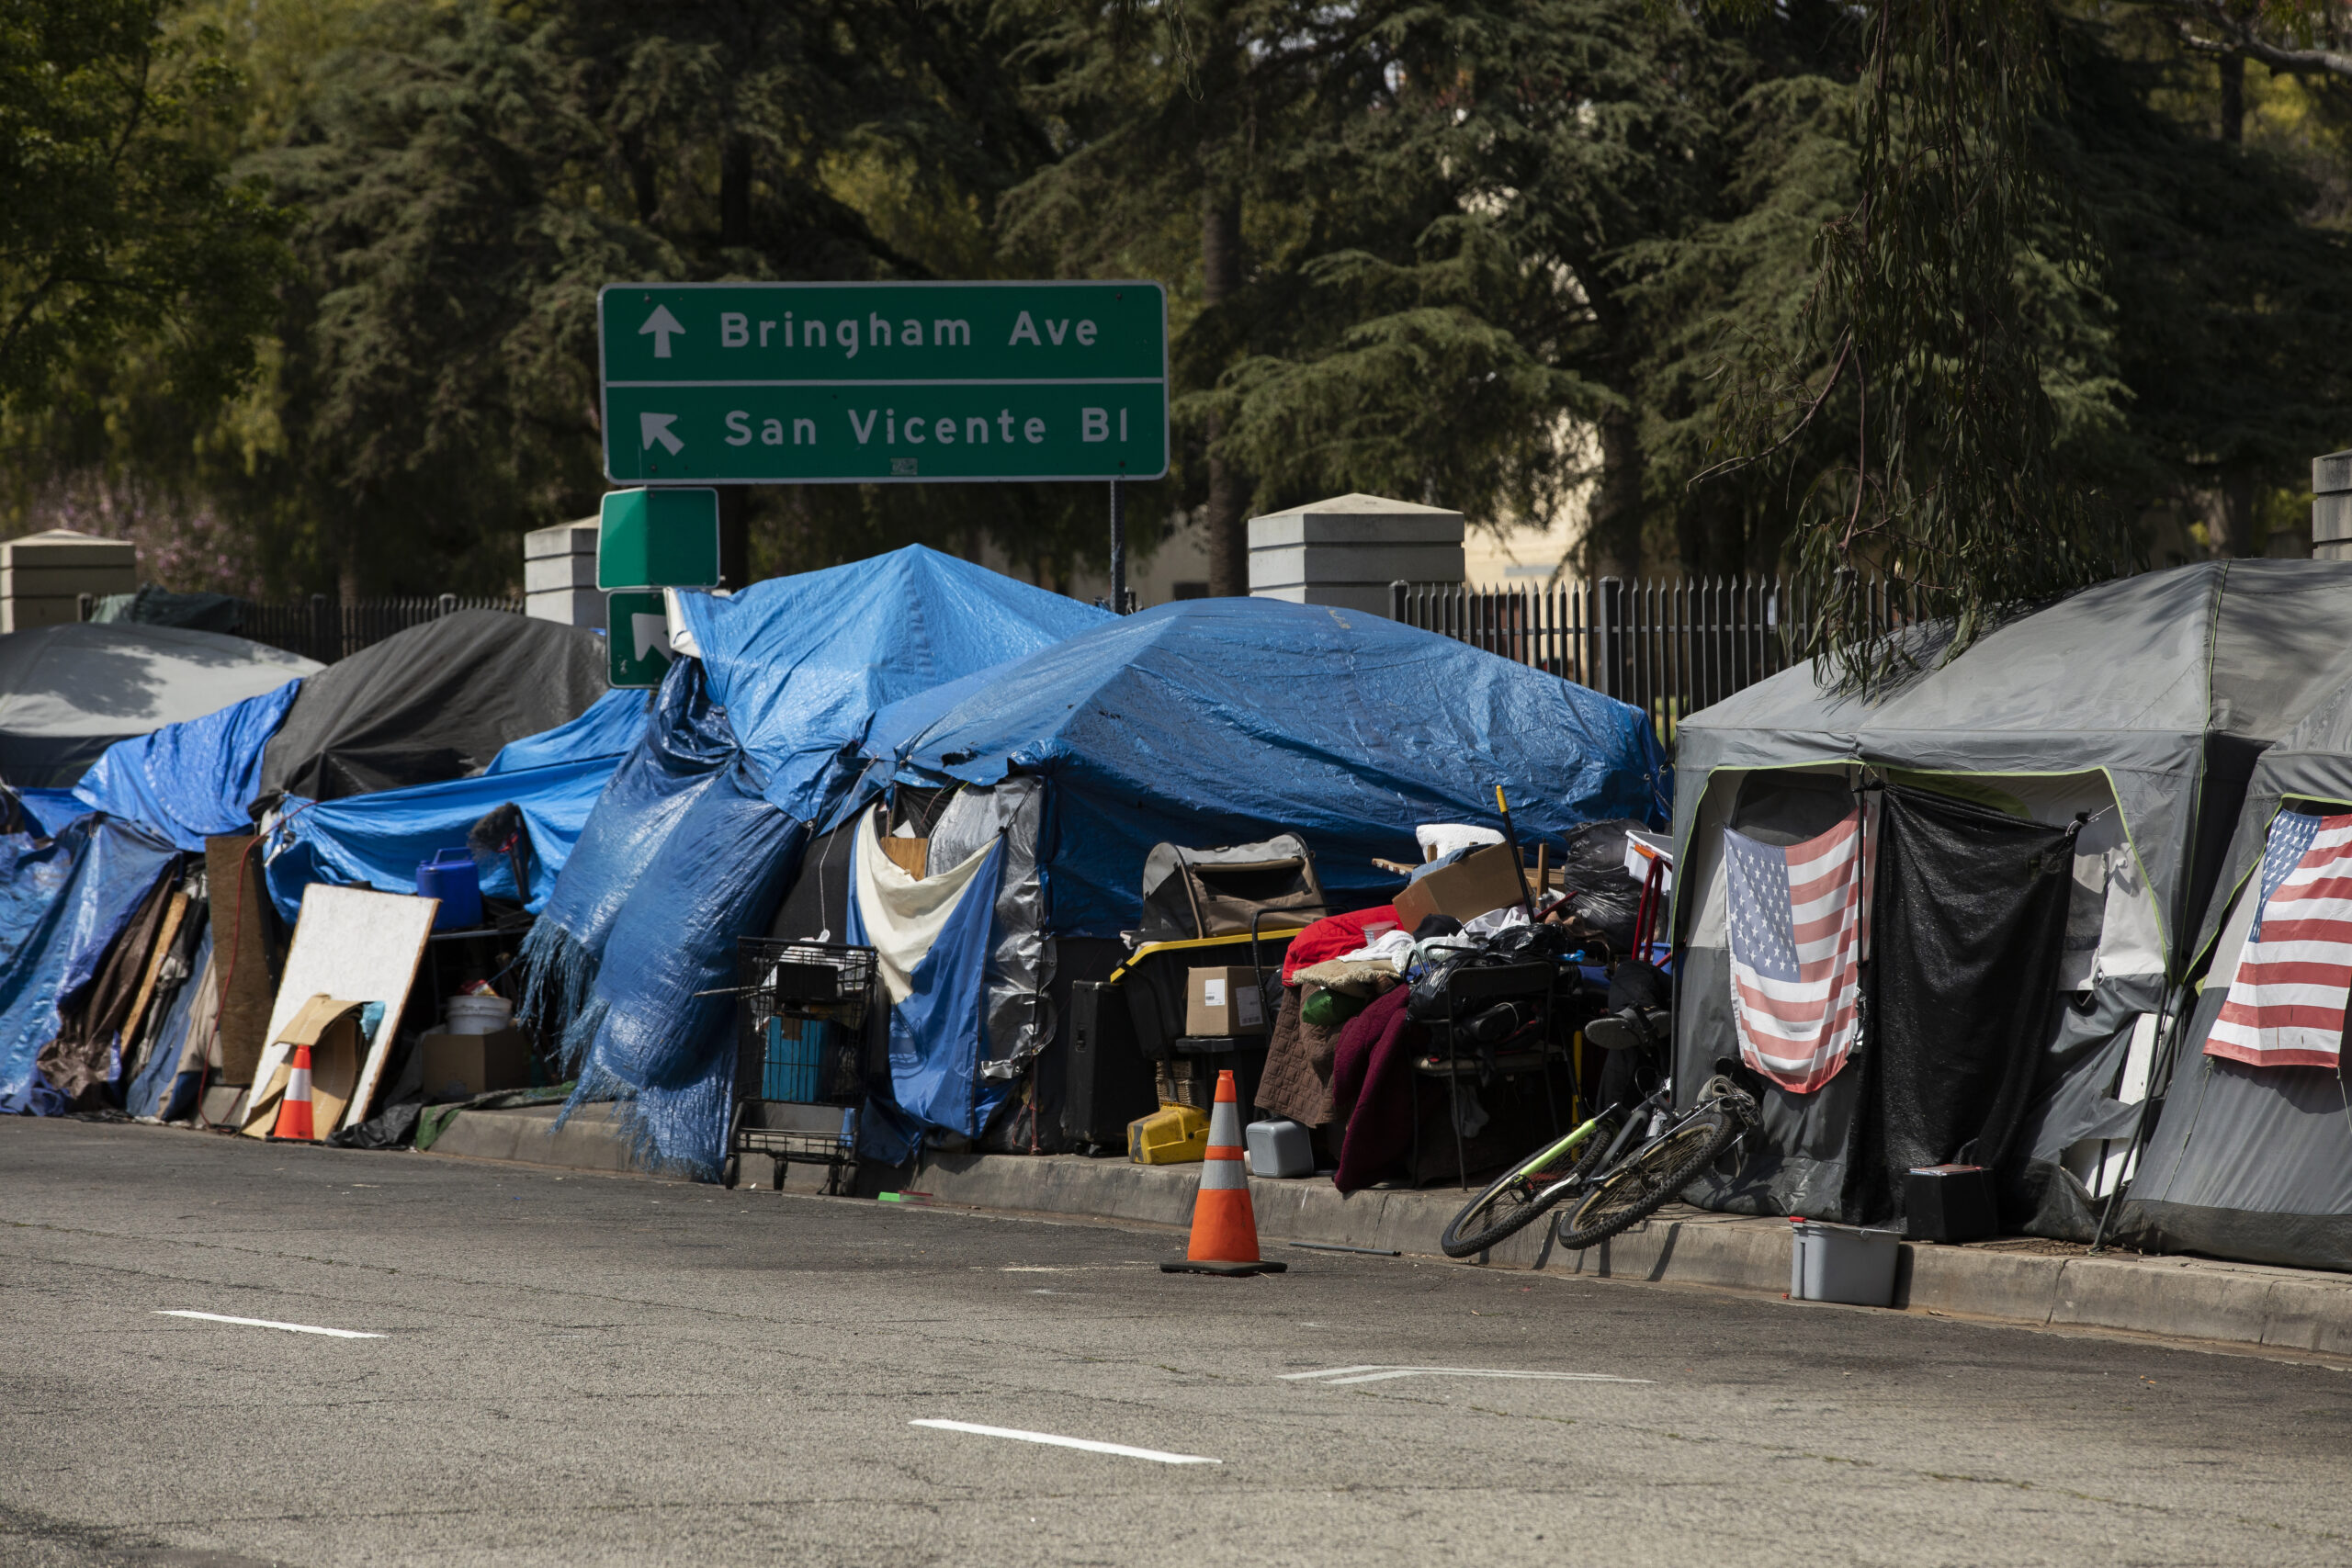 California Asks Biden Administration To Cover Six Months Of ‘Transitional Rent’ For Homeless With Medicaid